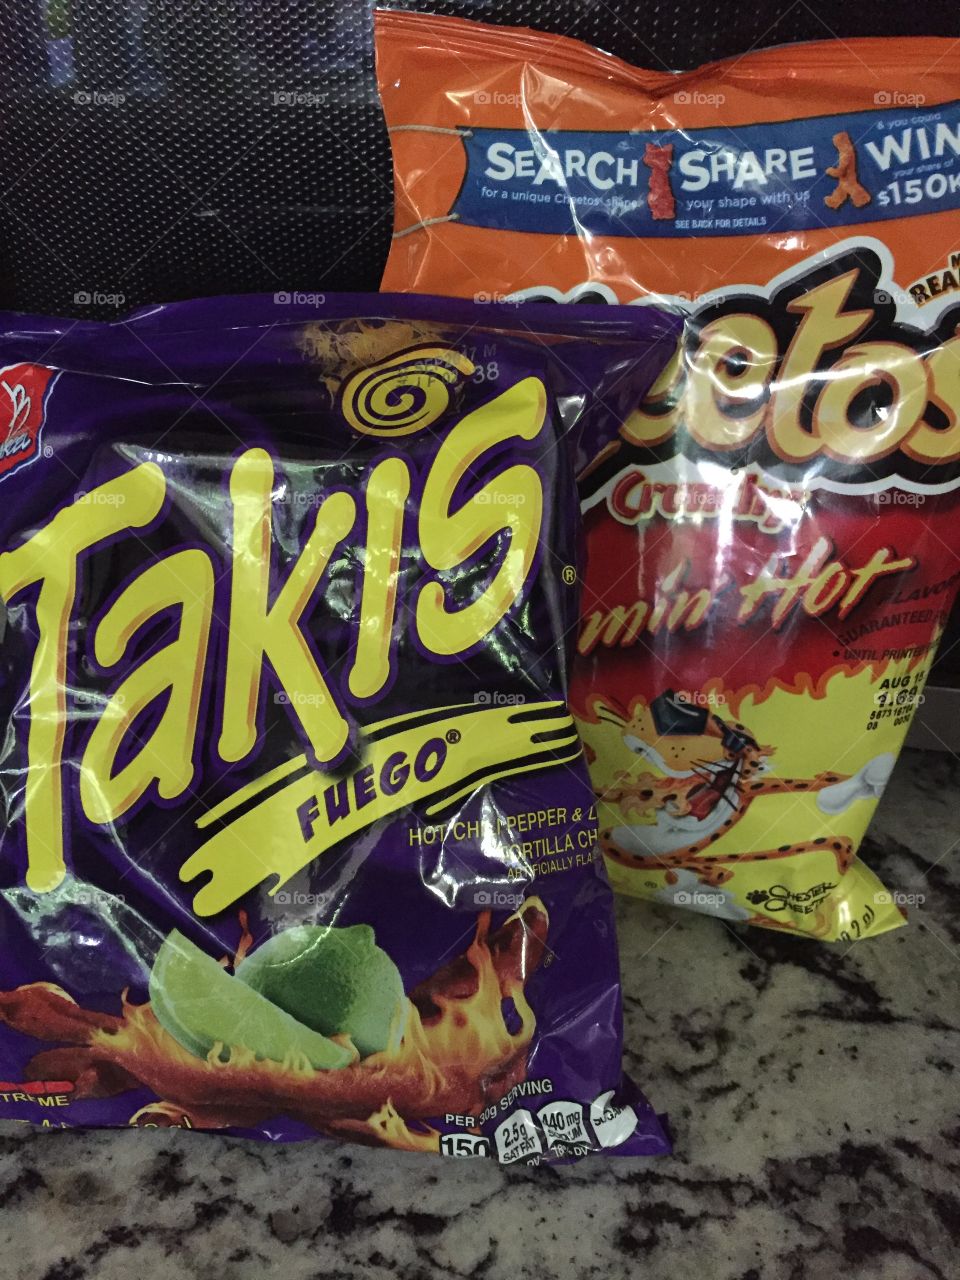 Cheetos and Takis